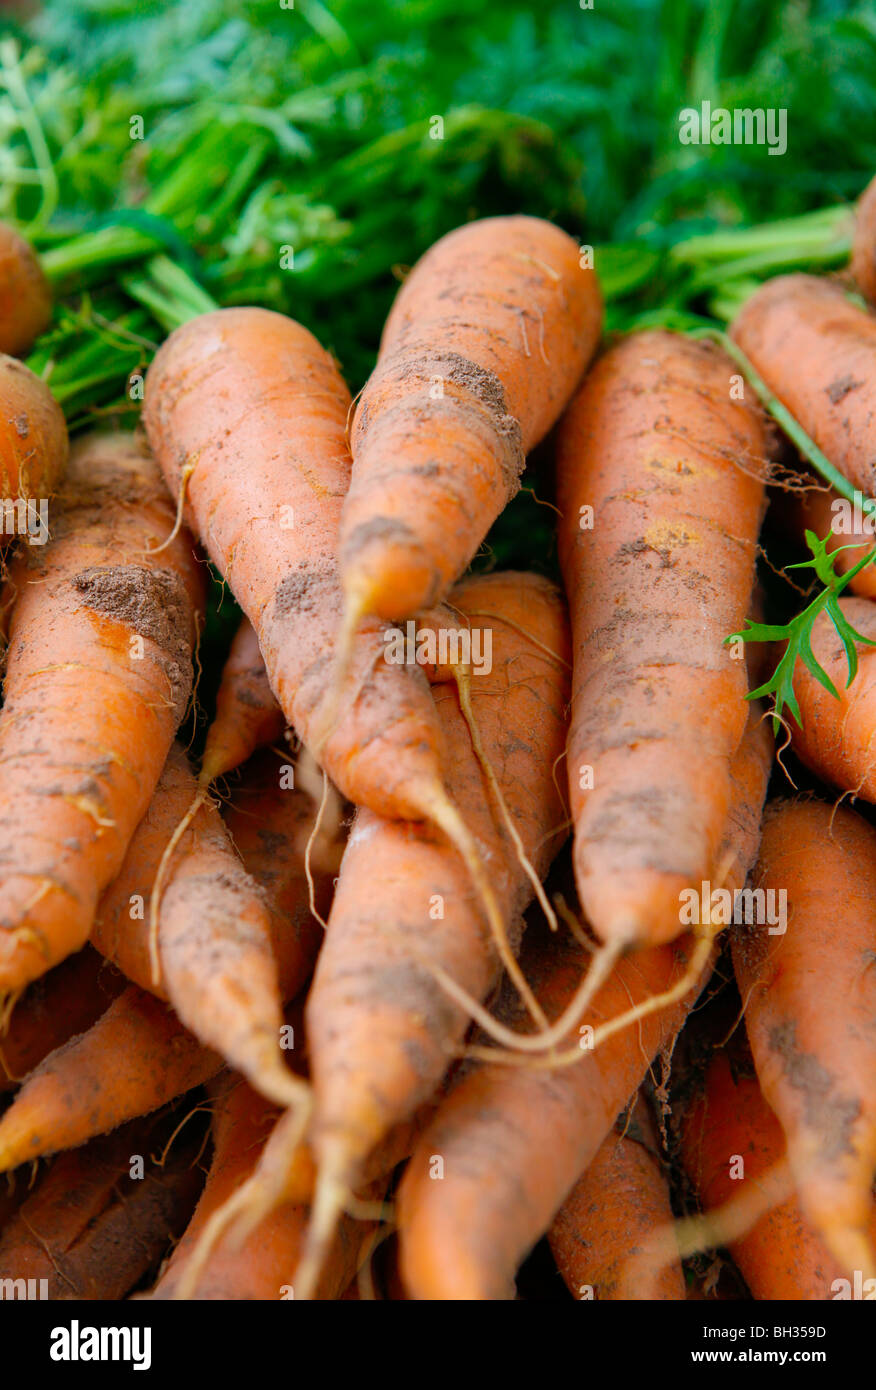 Bunches of freshly grown organic carrots. Stock Photo